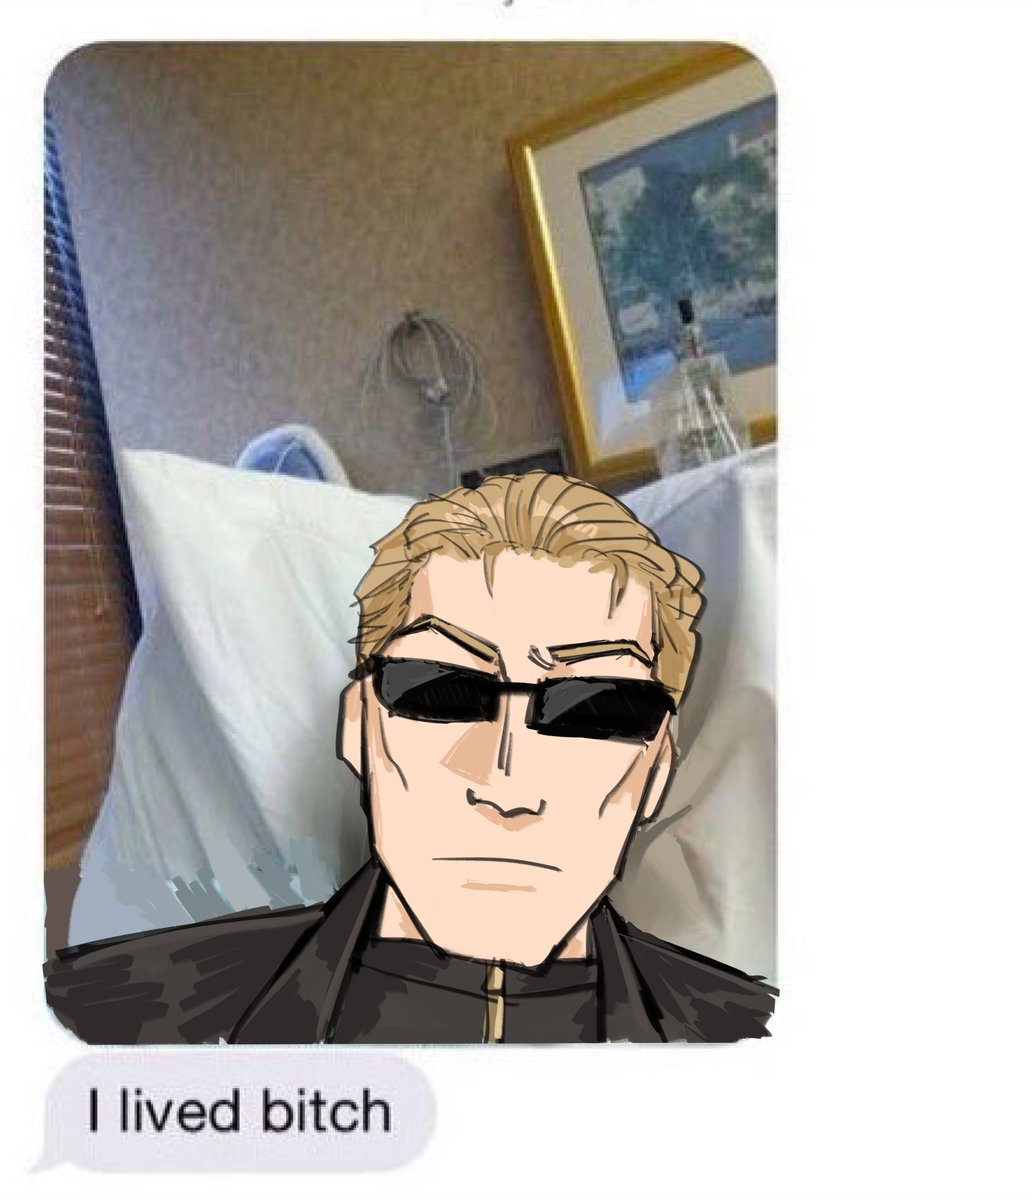 Wesker, who has been in a coma for 1 week and presumed dead, texted me this
#AlbertWesker #ResidentEvil #DeadbyDaylight